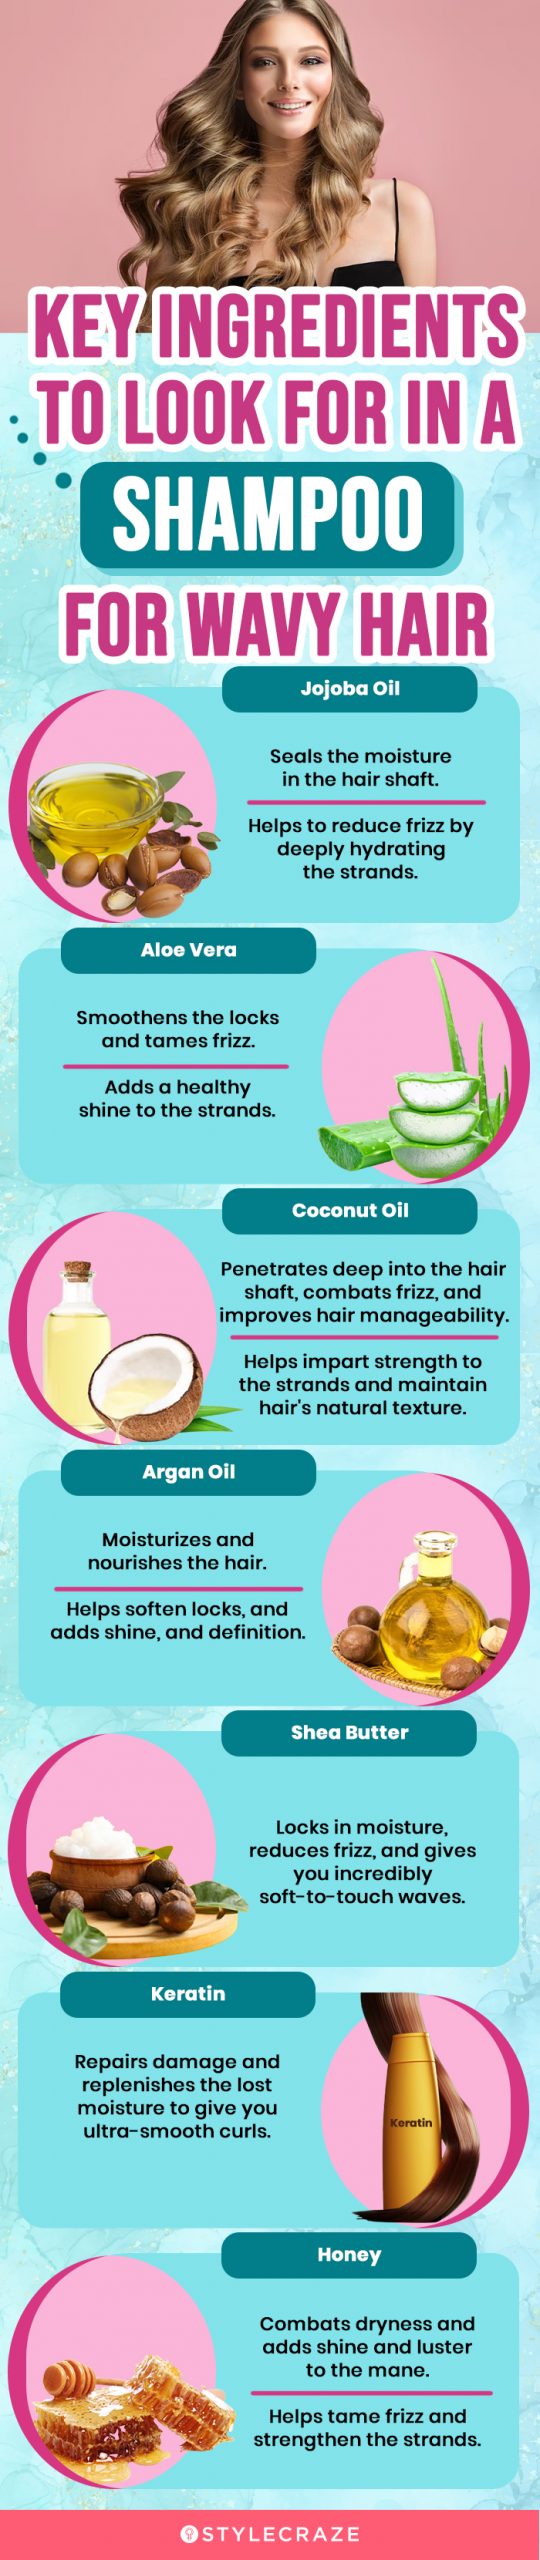 Key Ingredients To Look For In A Shampoo For Wavy Hair (infographic)